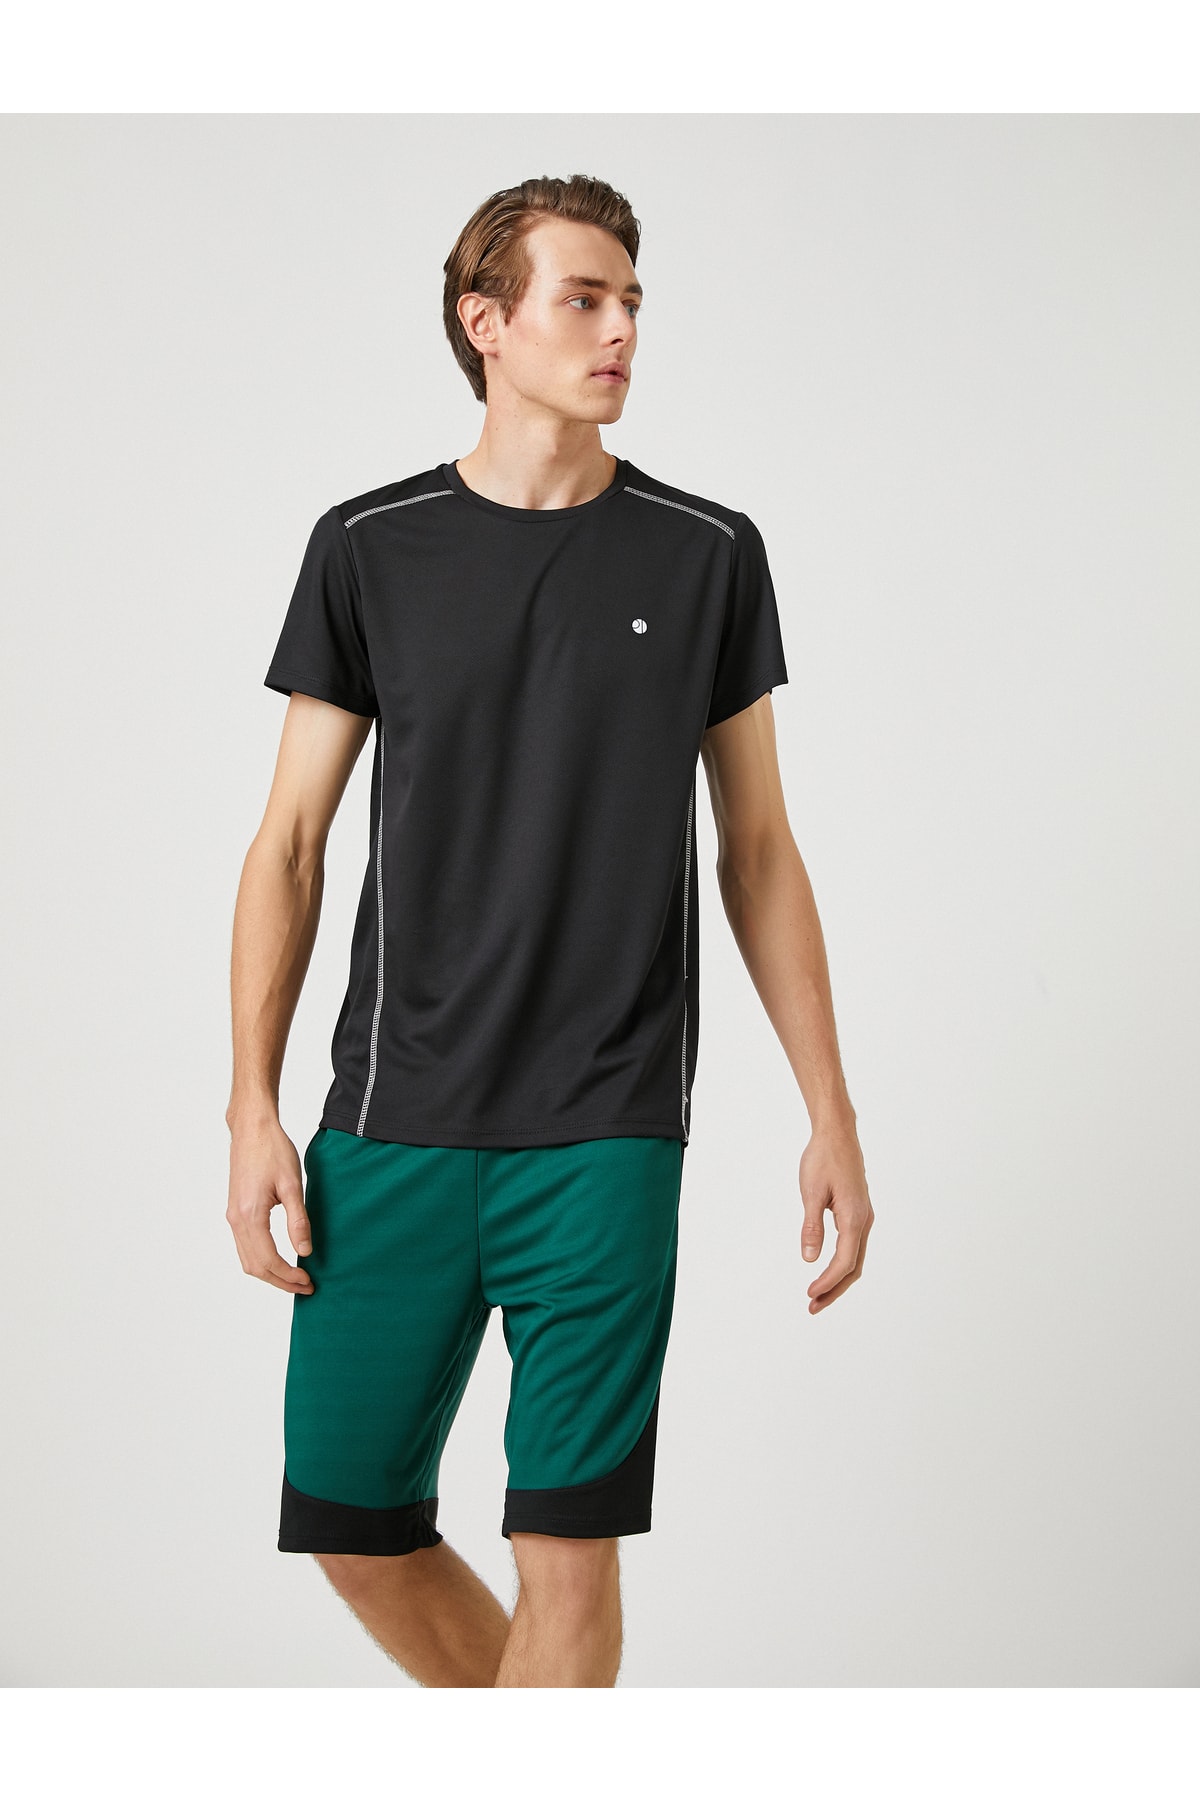 Koton Sports T-Shirt with Stripe Print Detailed Crew Neck Breathable Fabric.